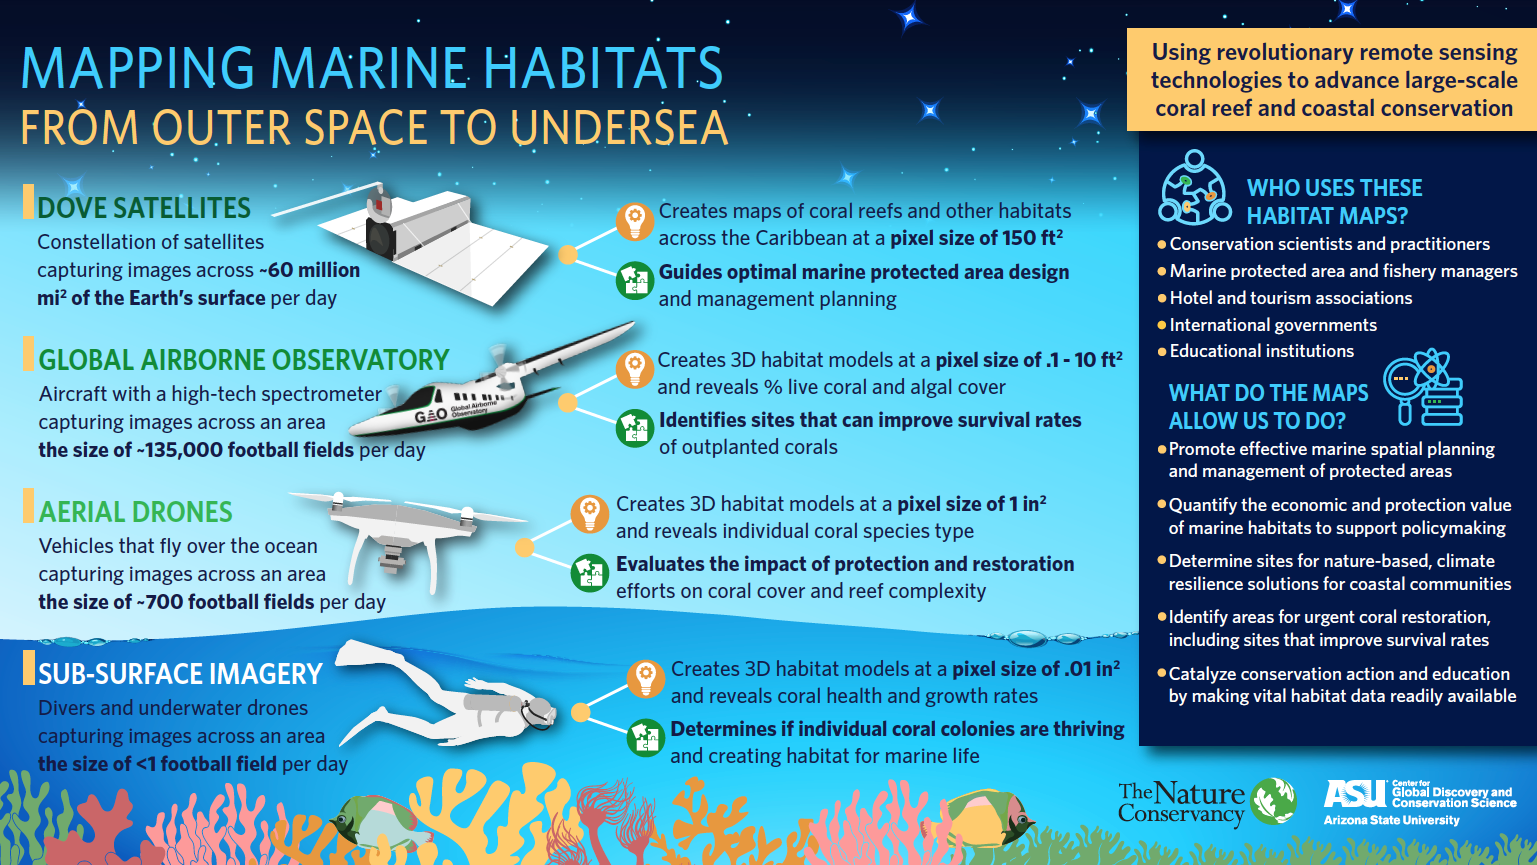 How It Works - Taking to the Skies to Protect the Sea